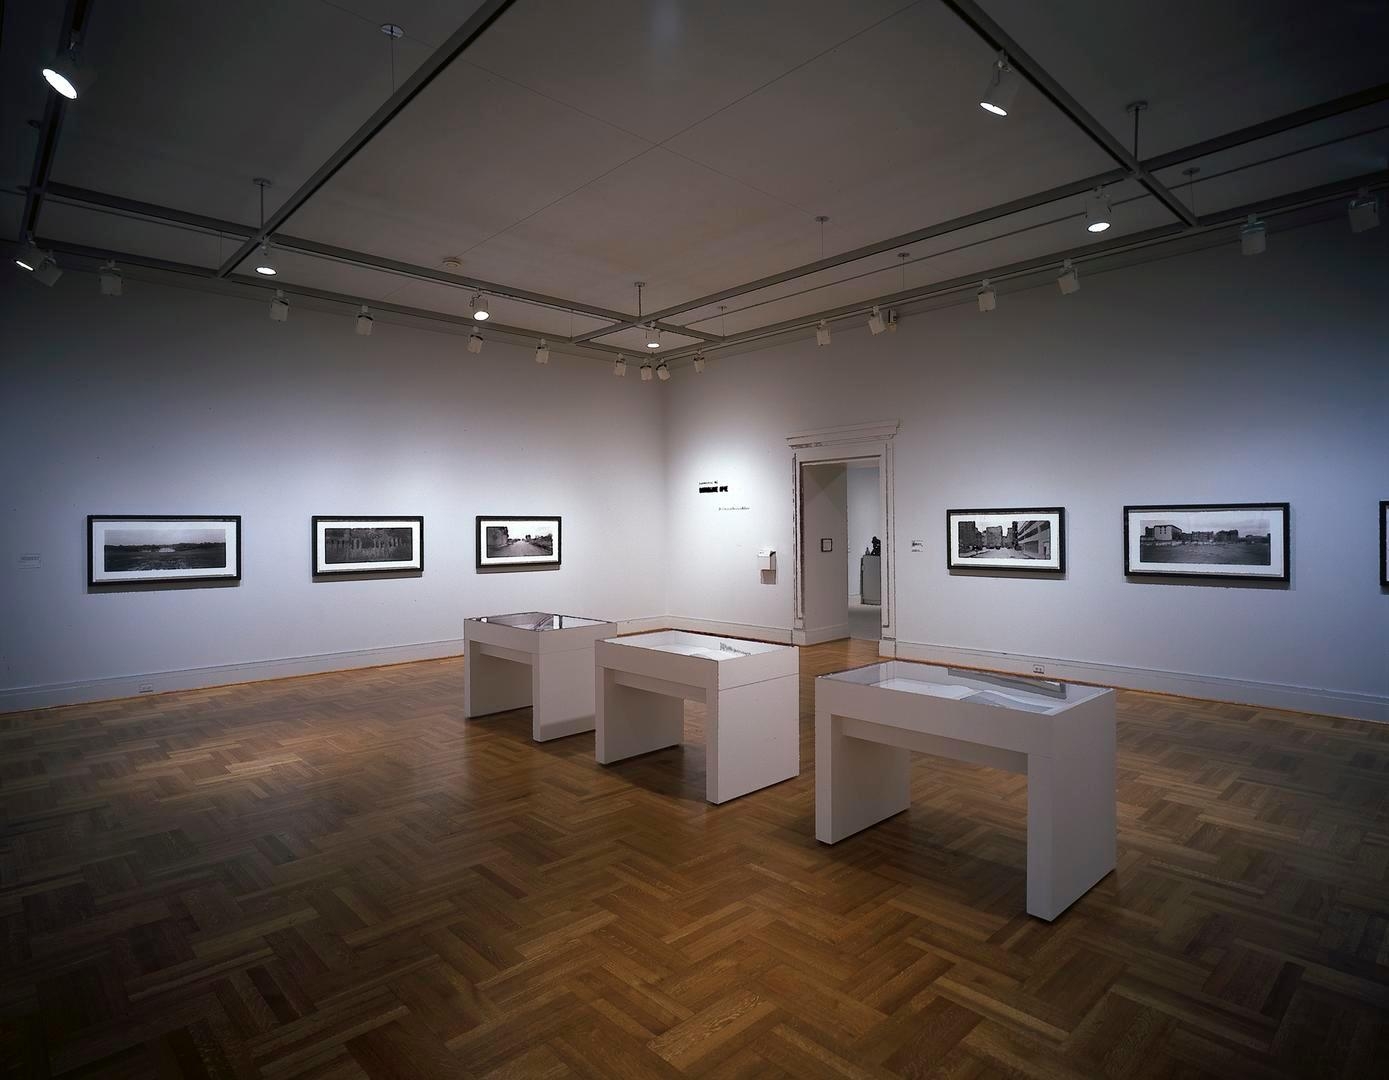  Installation view of Catherine Opie:&nbsp;in between here and there&nbsp;at the Saint Louis Art Museum, Saint Louis